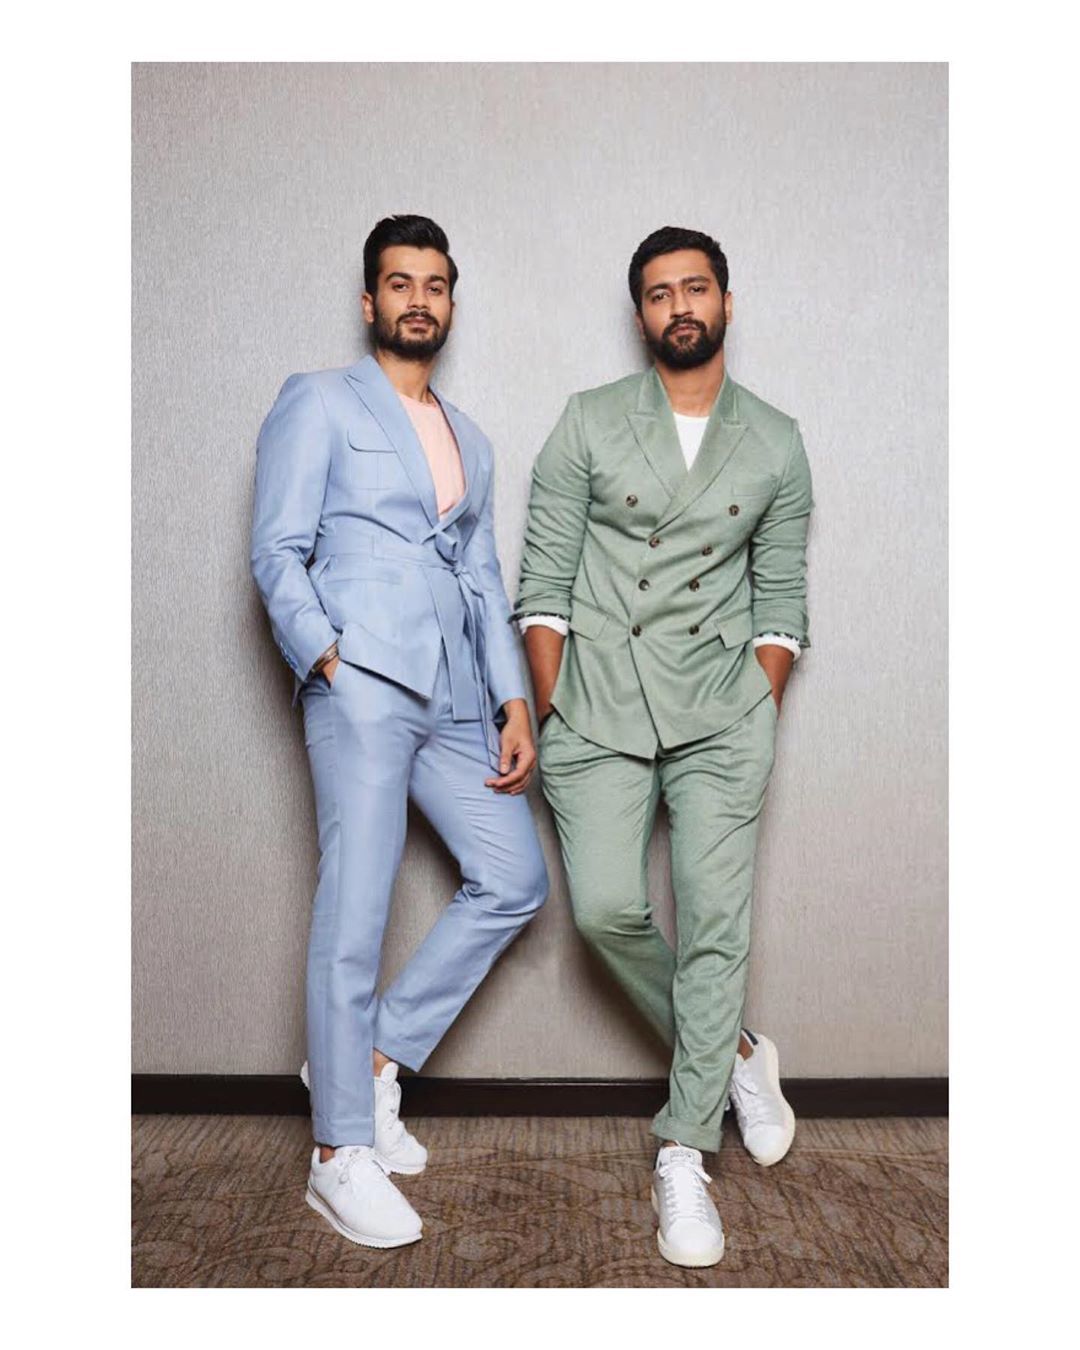 Sunny Kaushal Finds The Tag 'Vicky Kaushal's Brother' A Little Irritating, Feels It Will Go Away With Time